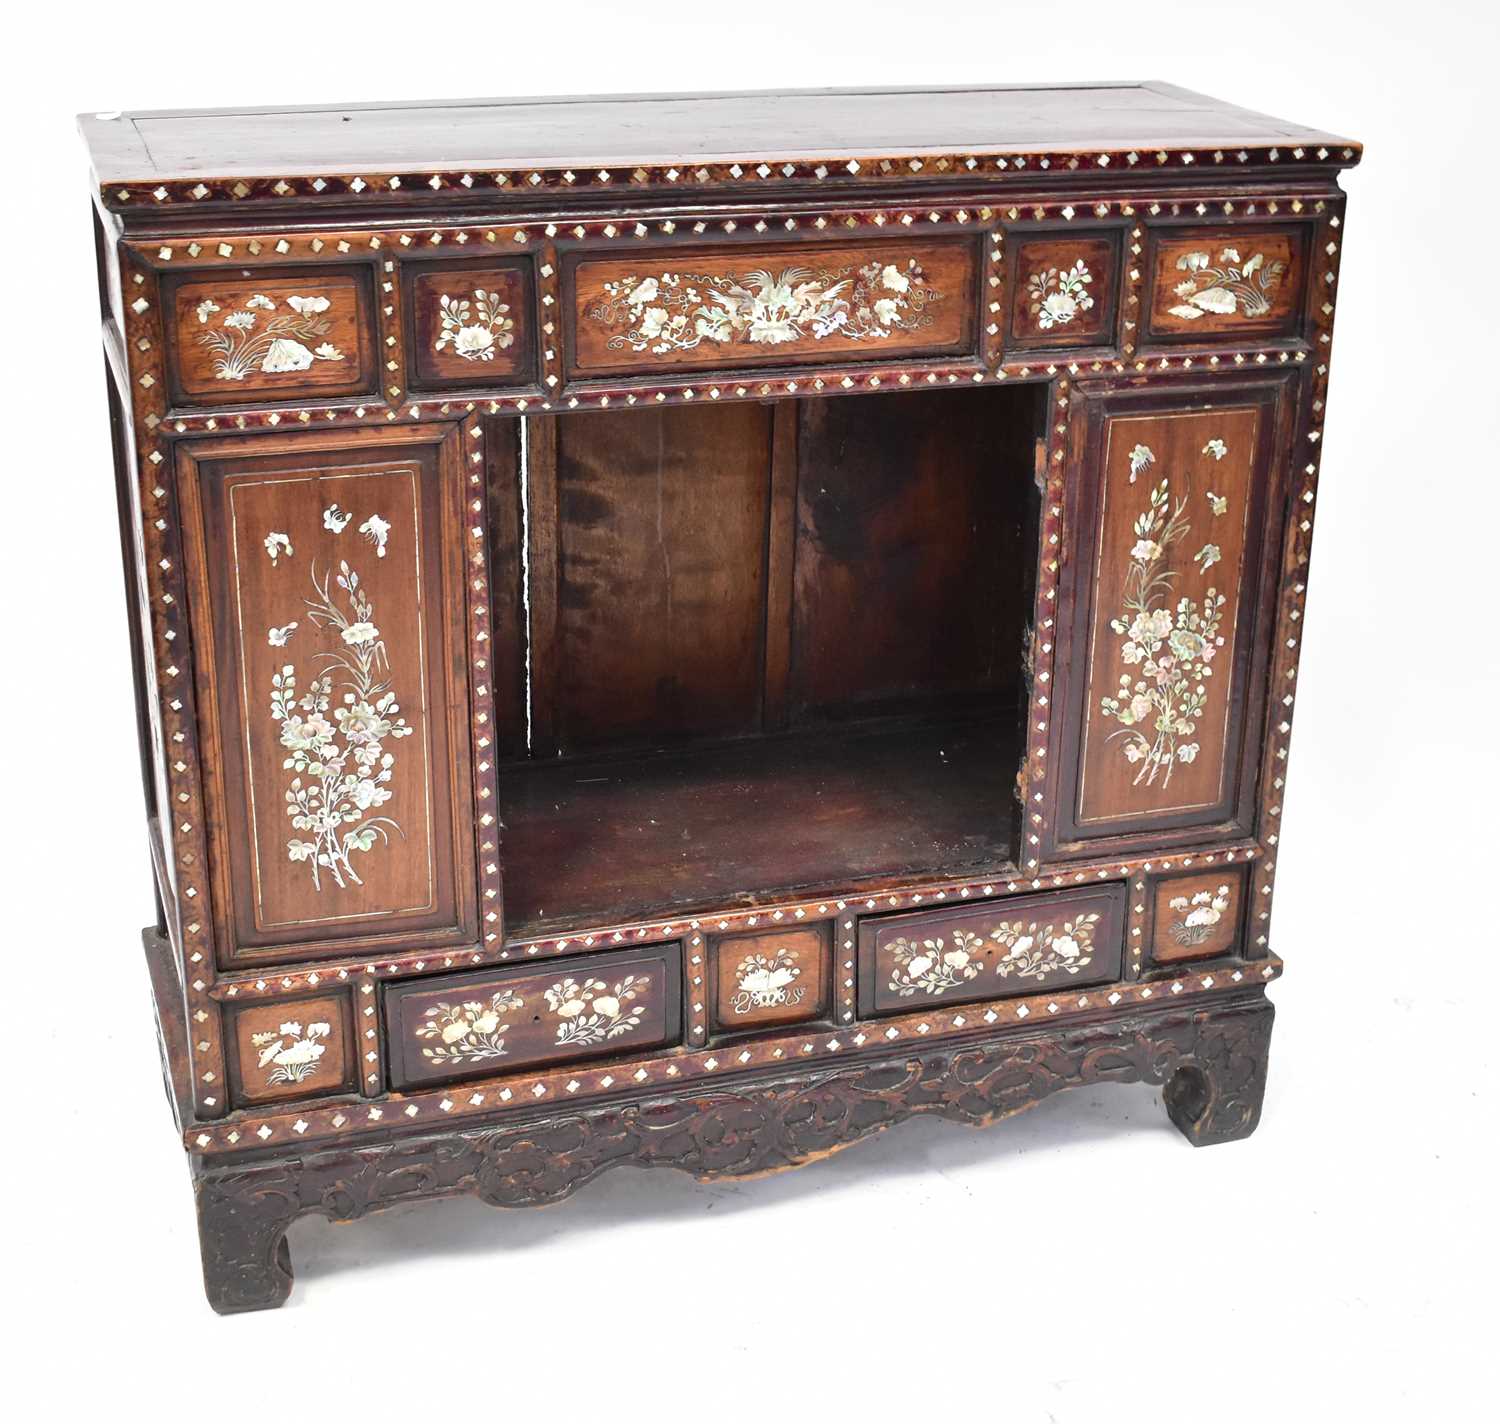 An early 20th century Chinese stained hardwood mother of pearl inlaid side cabinet, with carved